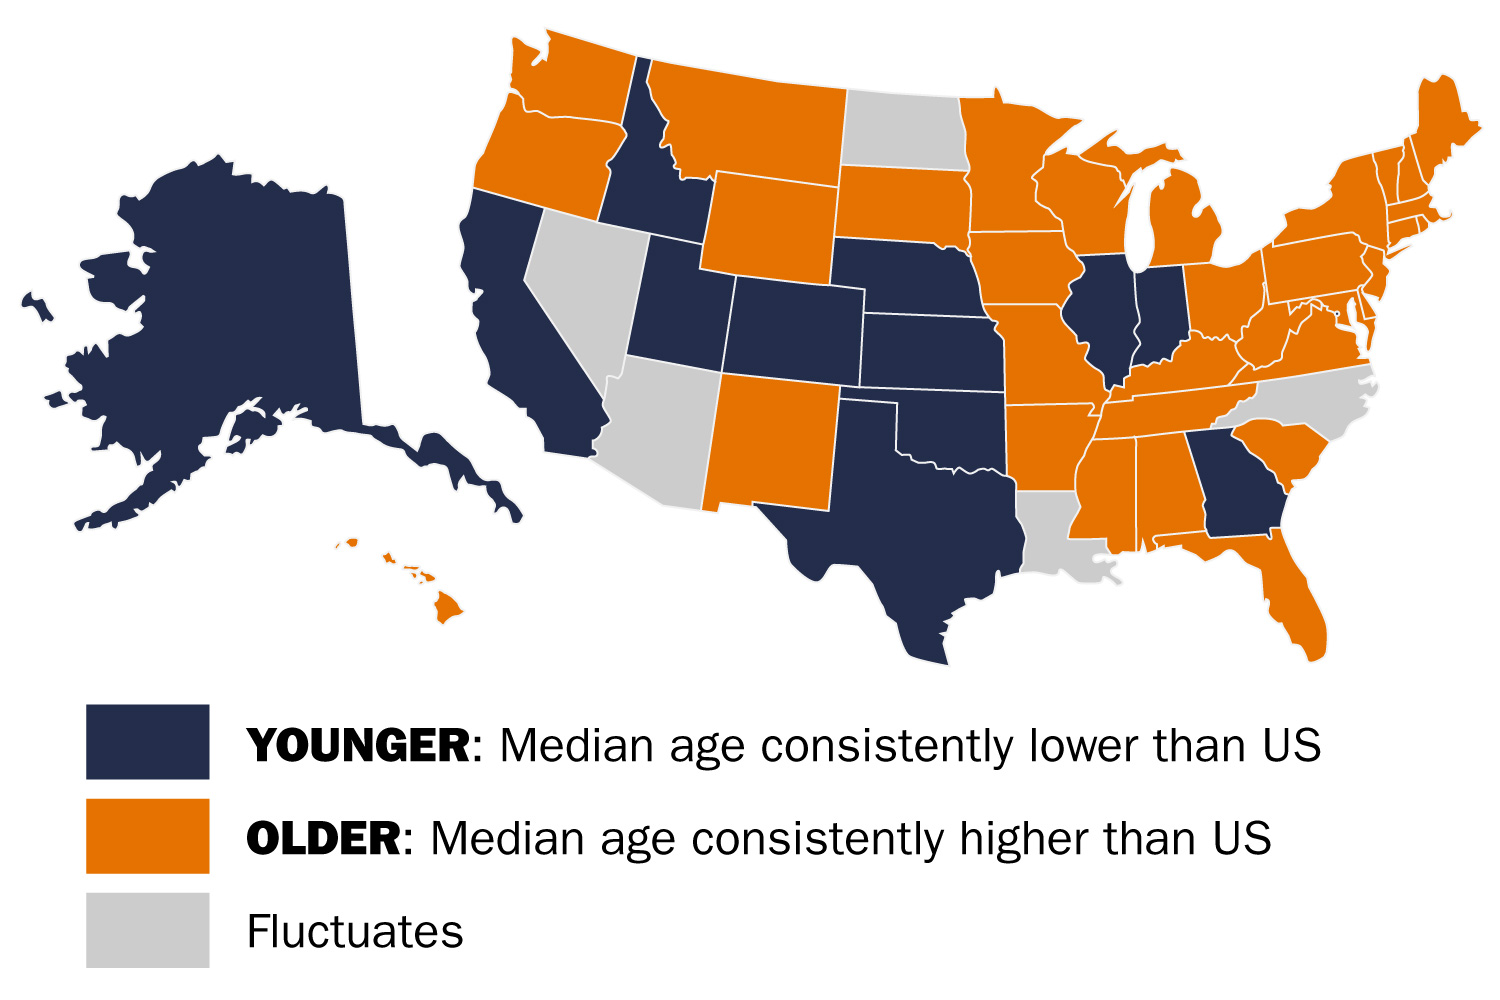 United states in different colors: orange (below median age), blue (above median age), and grey (Fluctuates)